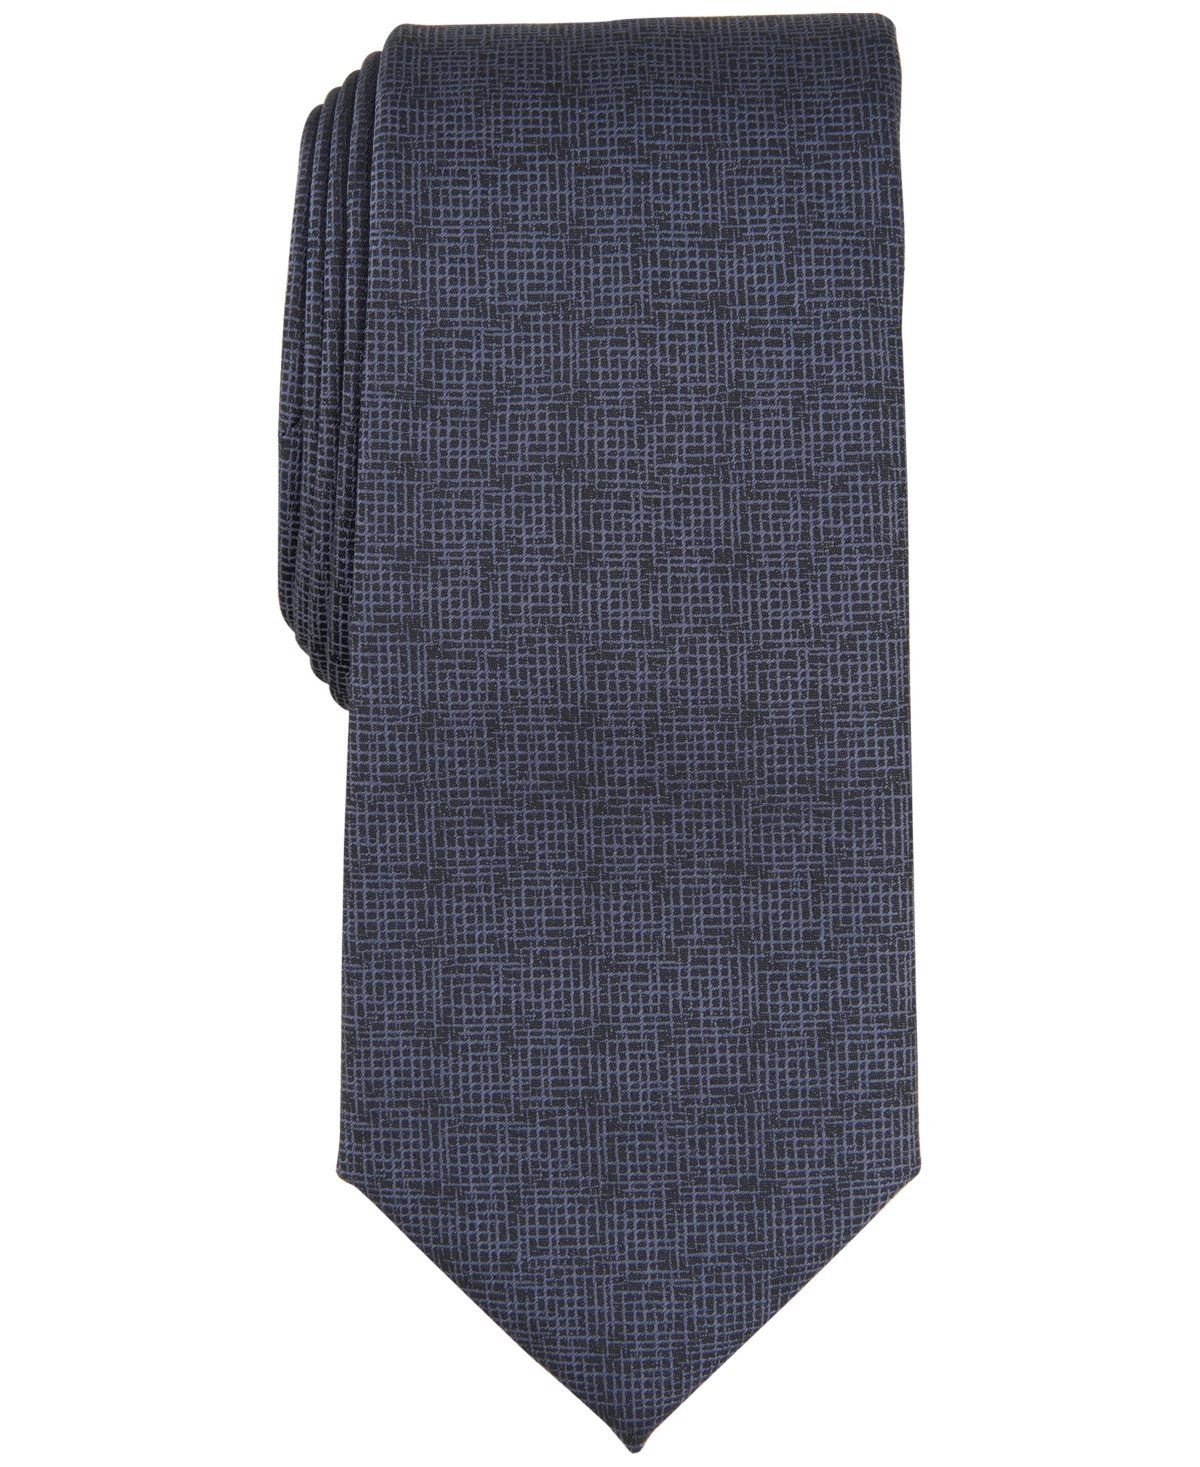 Men's Glynn Textured Tie, Created for Macy's - Charcoal